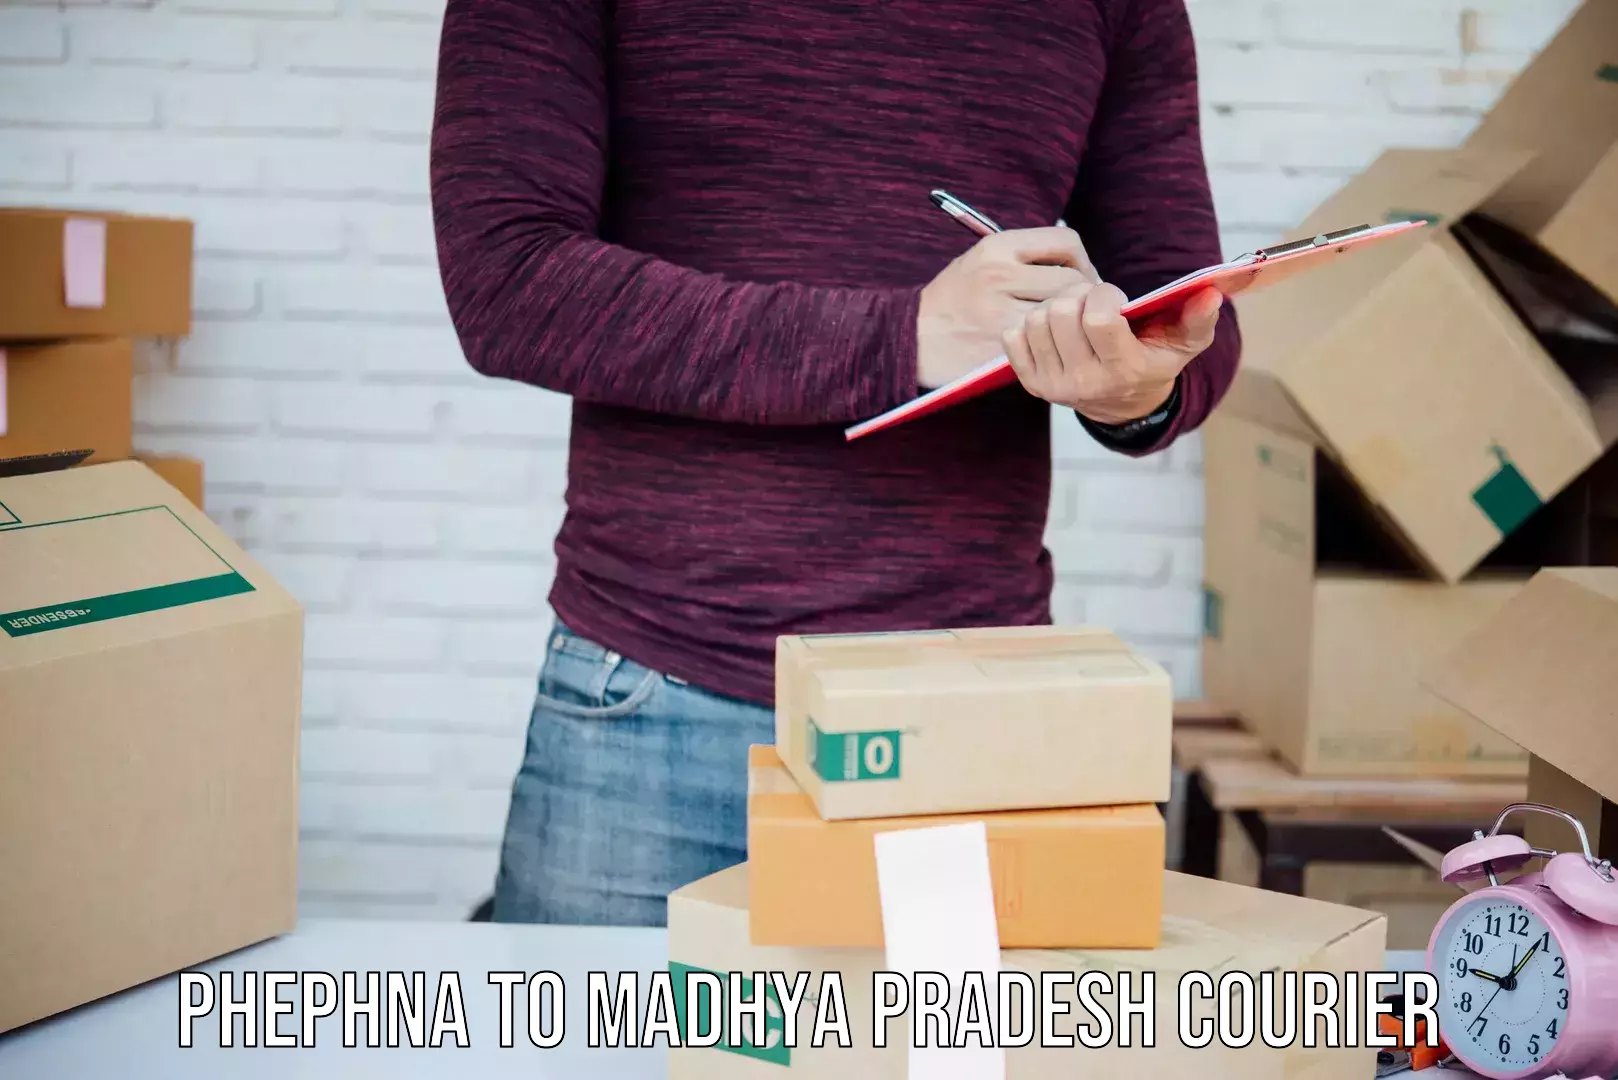 Enhanced delivery experience Phephna to Alote